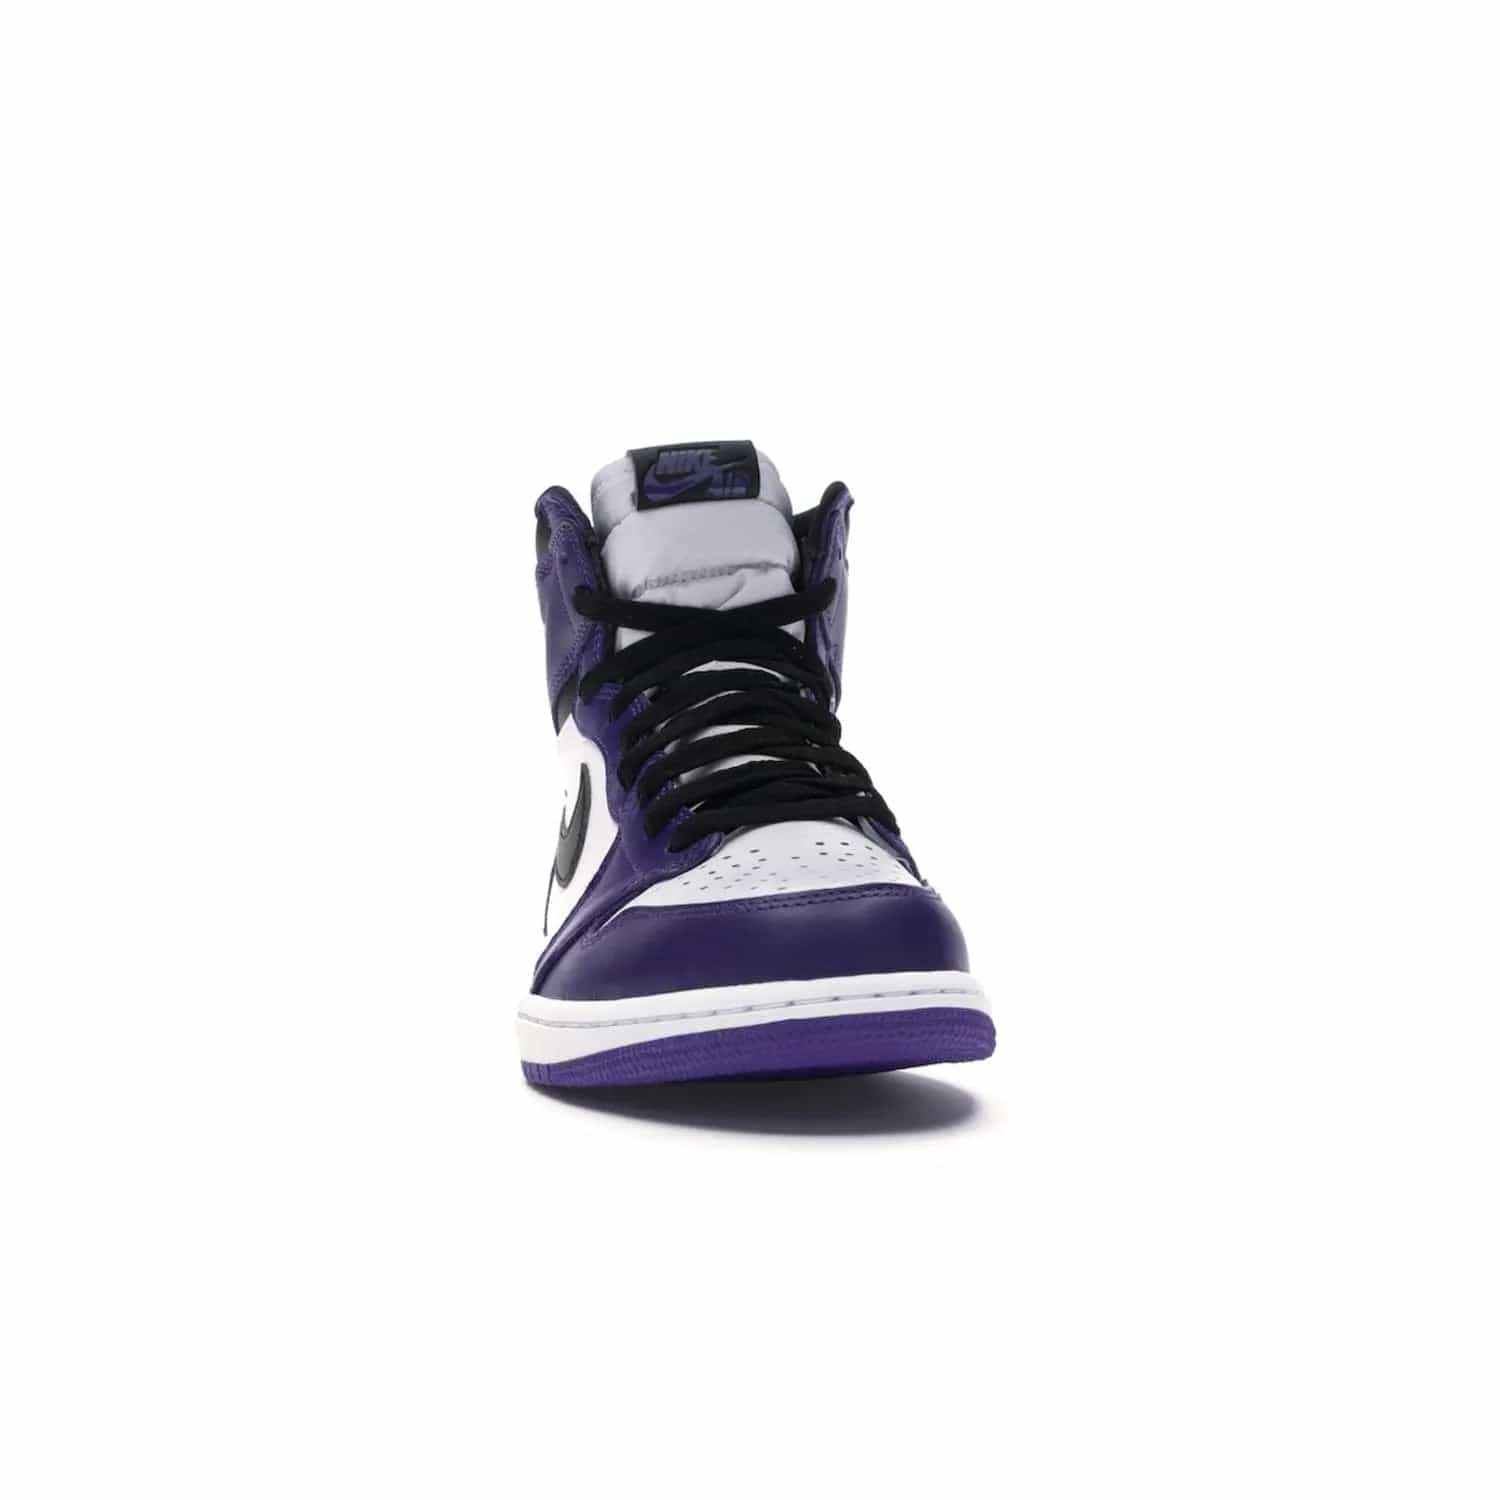 Jordan 1 Retro High Court Purple White - Image 9 - Only at www.BallersClubKickz.com - Grab the classic Jordan 1 Retro High Court Purple White and add major flavor to your collection. White leather upper with Court Purple overlays and Swoosh logo. White midsole and purple outsole. Get yours and rep your Jordan Brand.